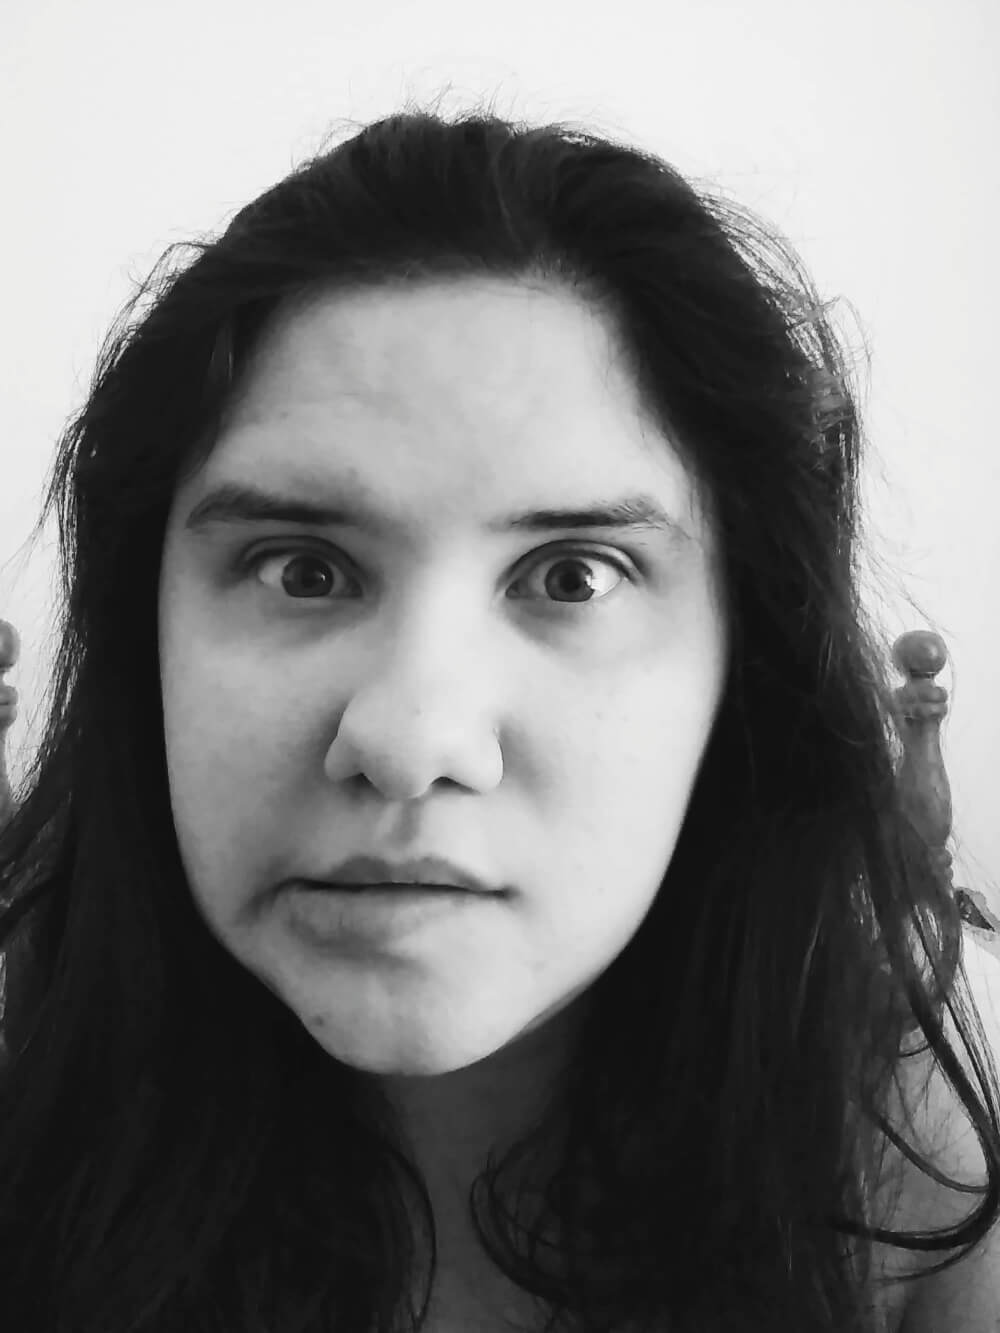 Black-and-white selfie of a wide-eyed countenance and slight look of "uh-oh" in mouth